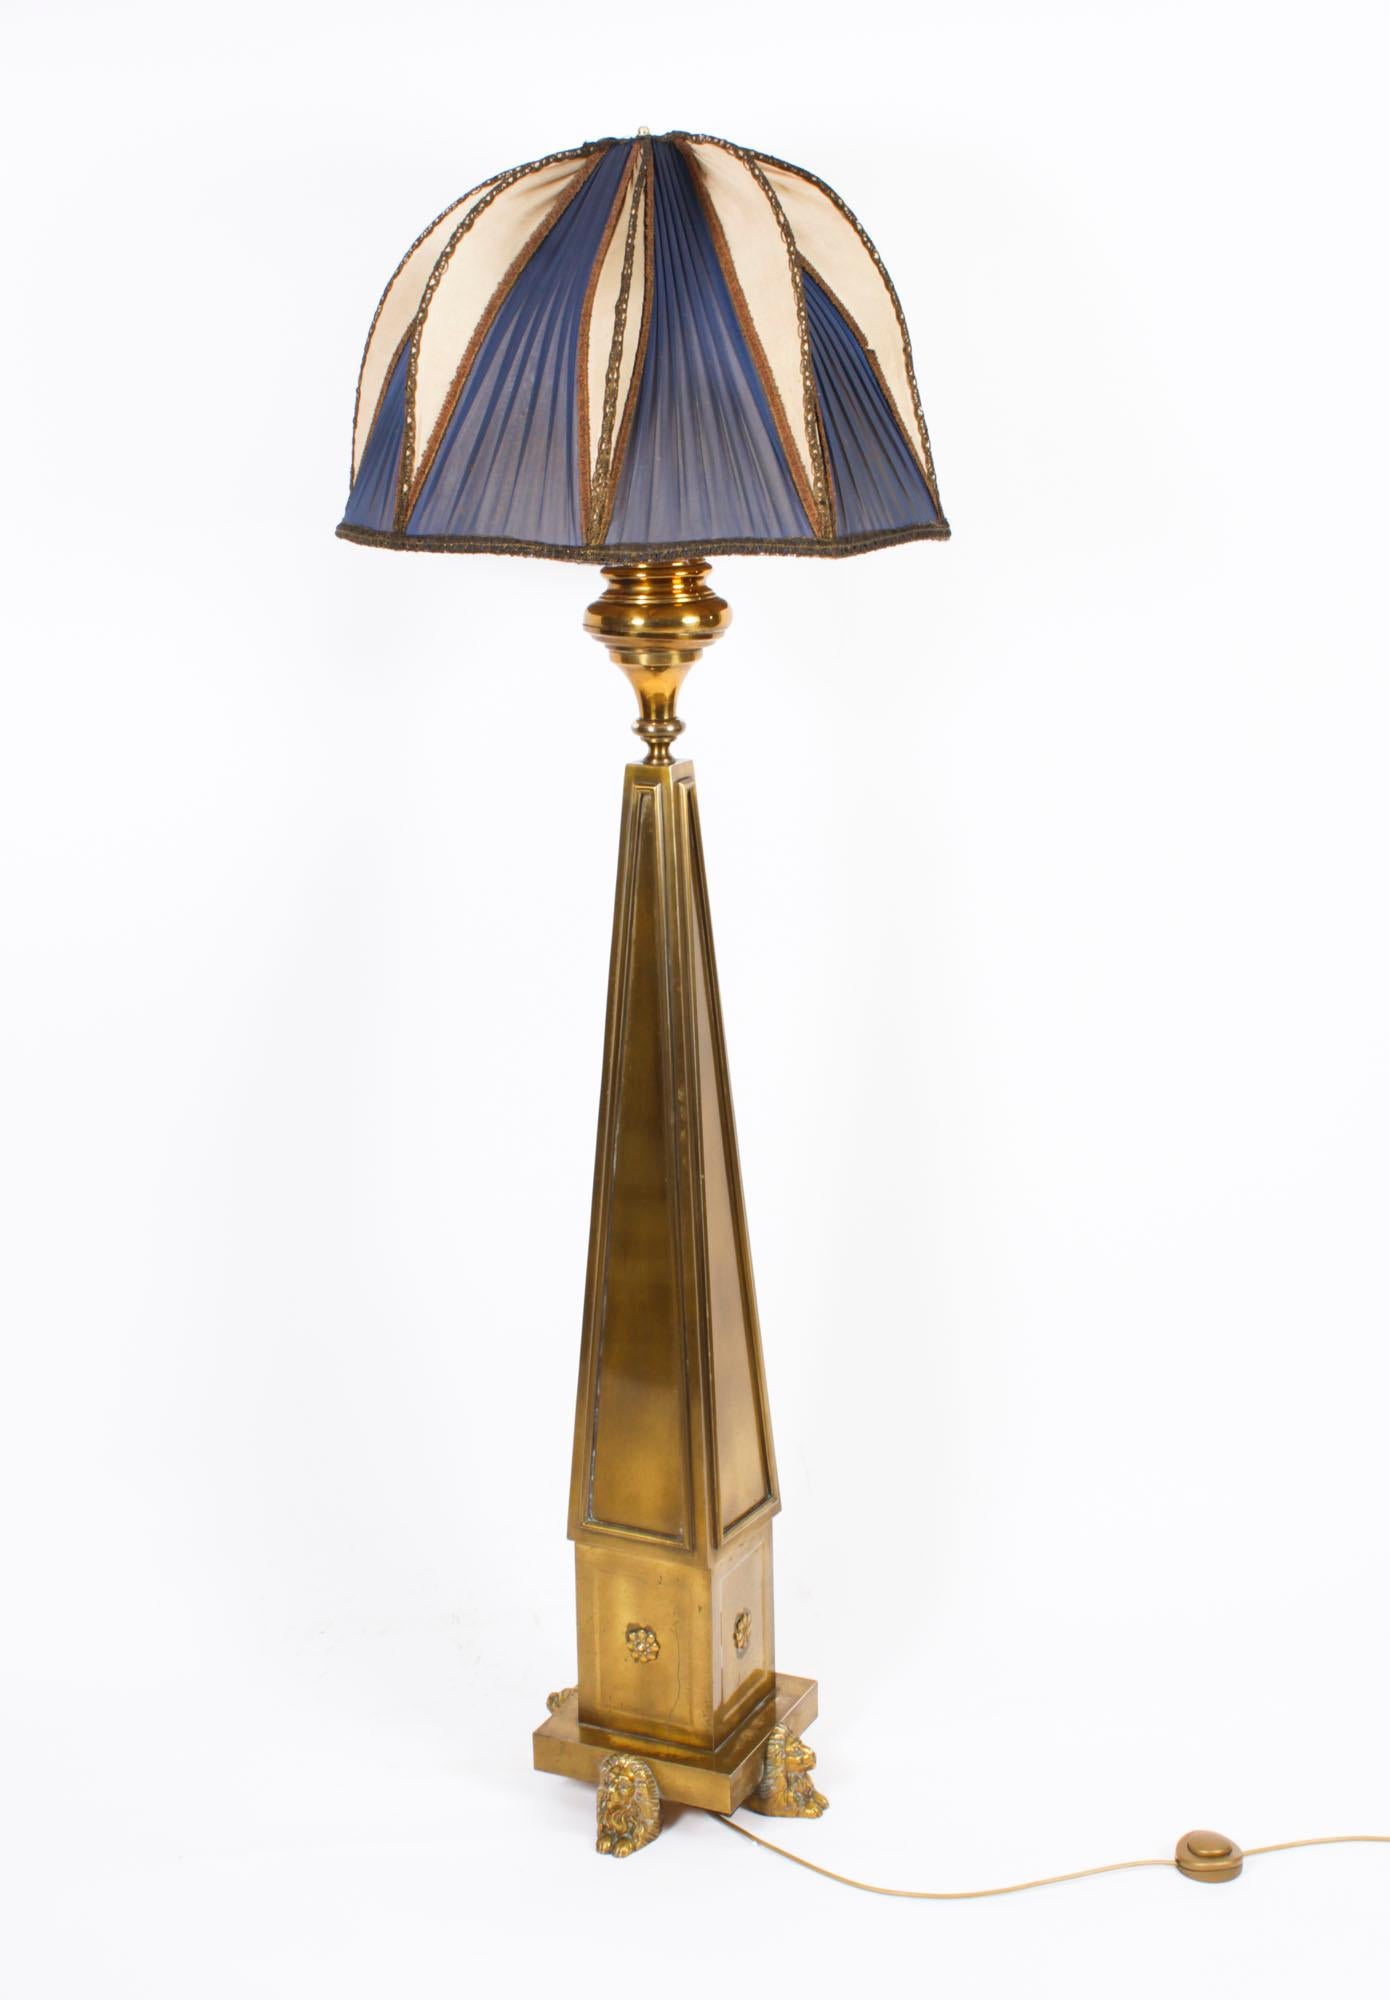 This is a highly attractive and exhibition quality antique French Art Deco brass and ormolu standard lamp and shade,  Circa 1920 in date.

This splendid lamp features a distinguished column with four triangular tapered sides rising from a stepped